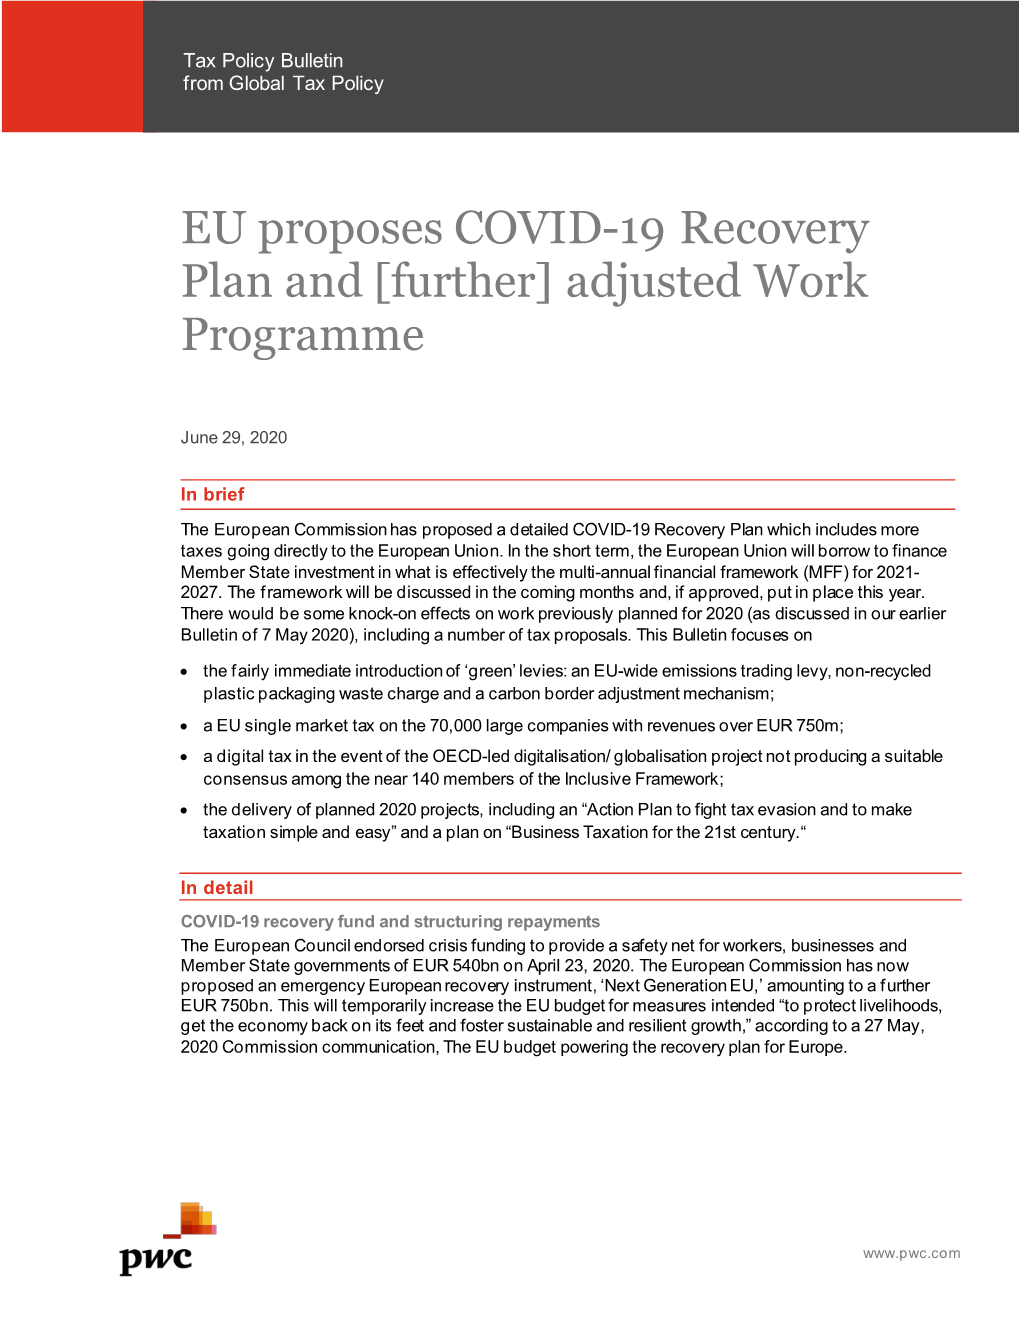 EU Proposes COVID-19 Recovery Plan and [Further] Adjusted Work Programme